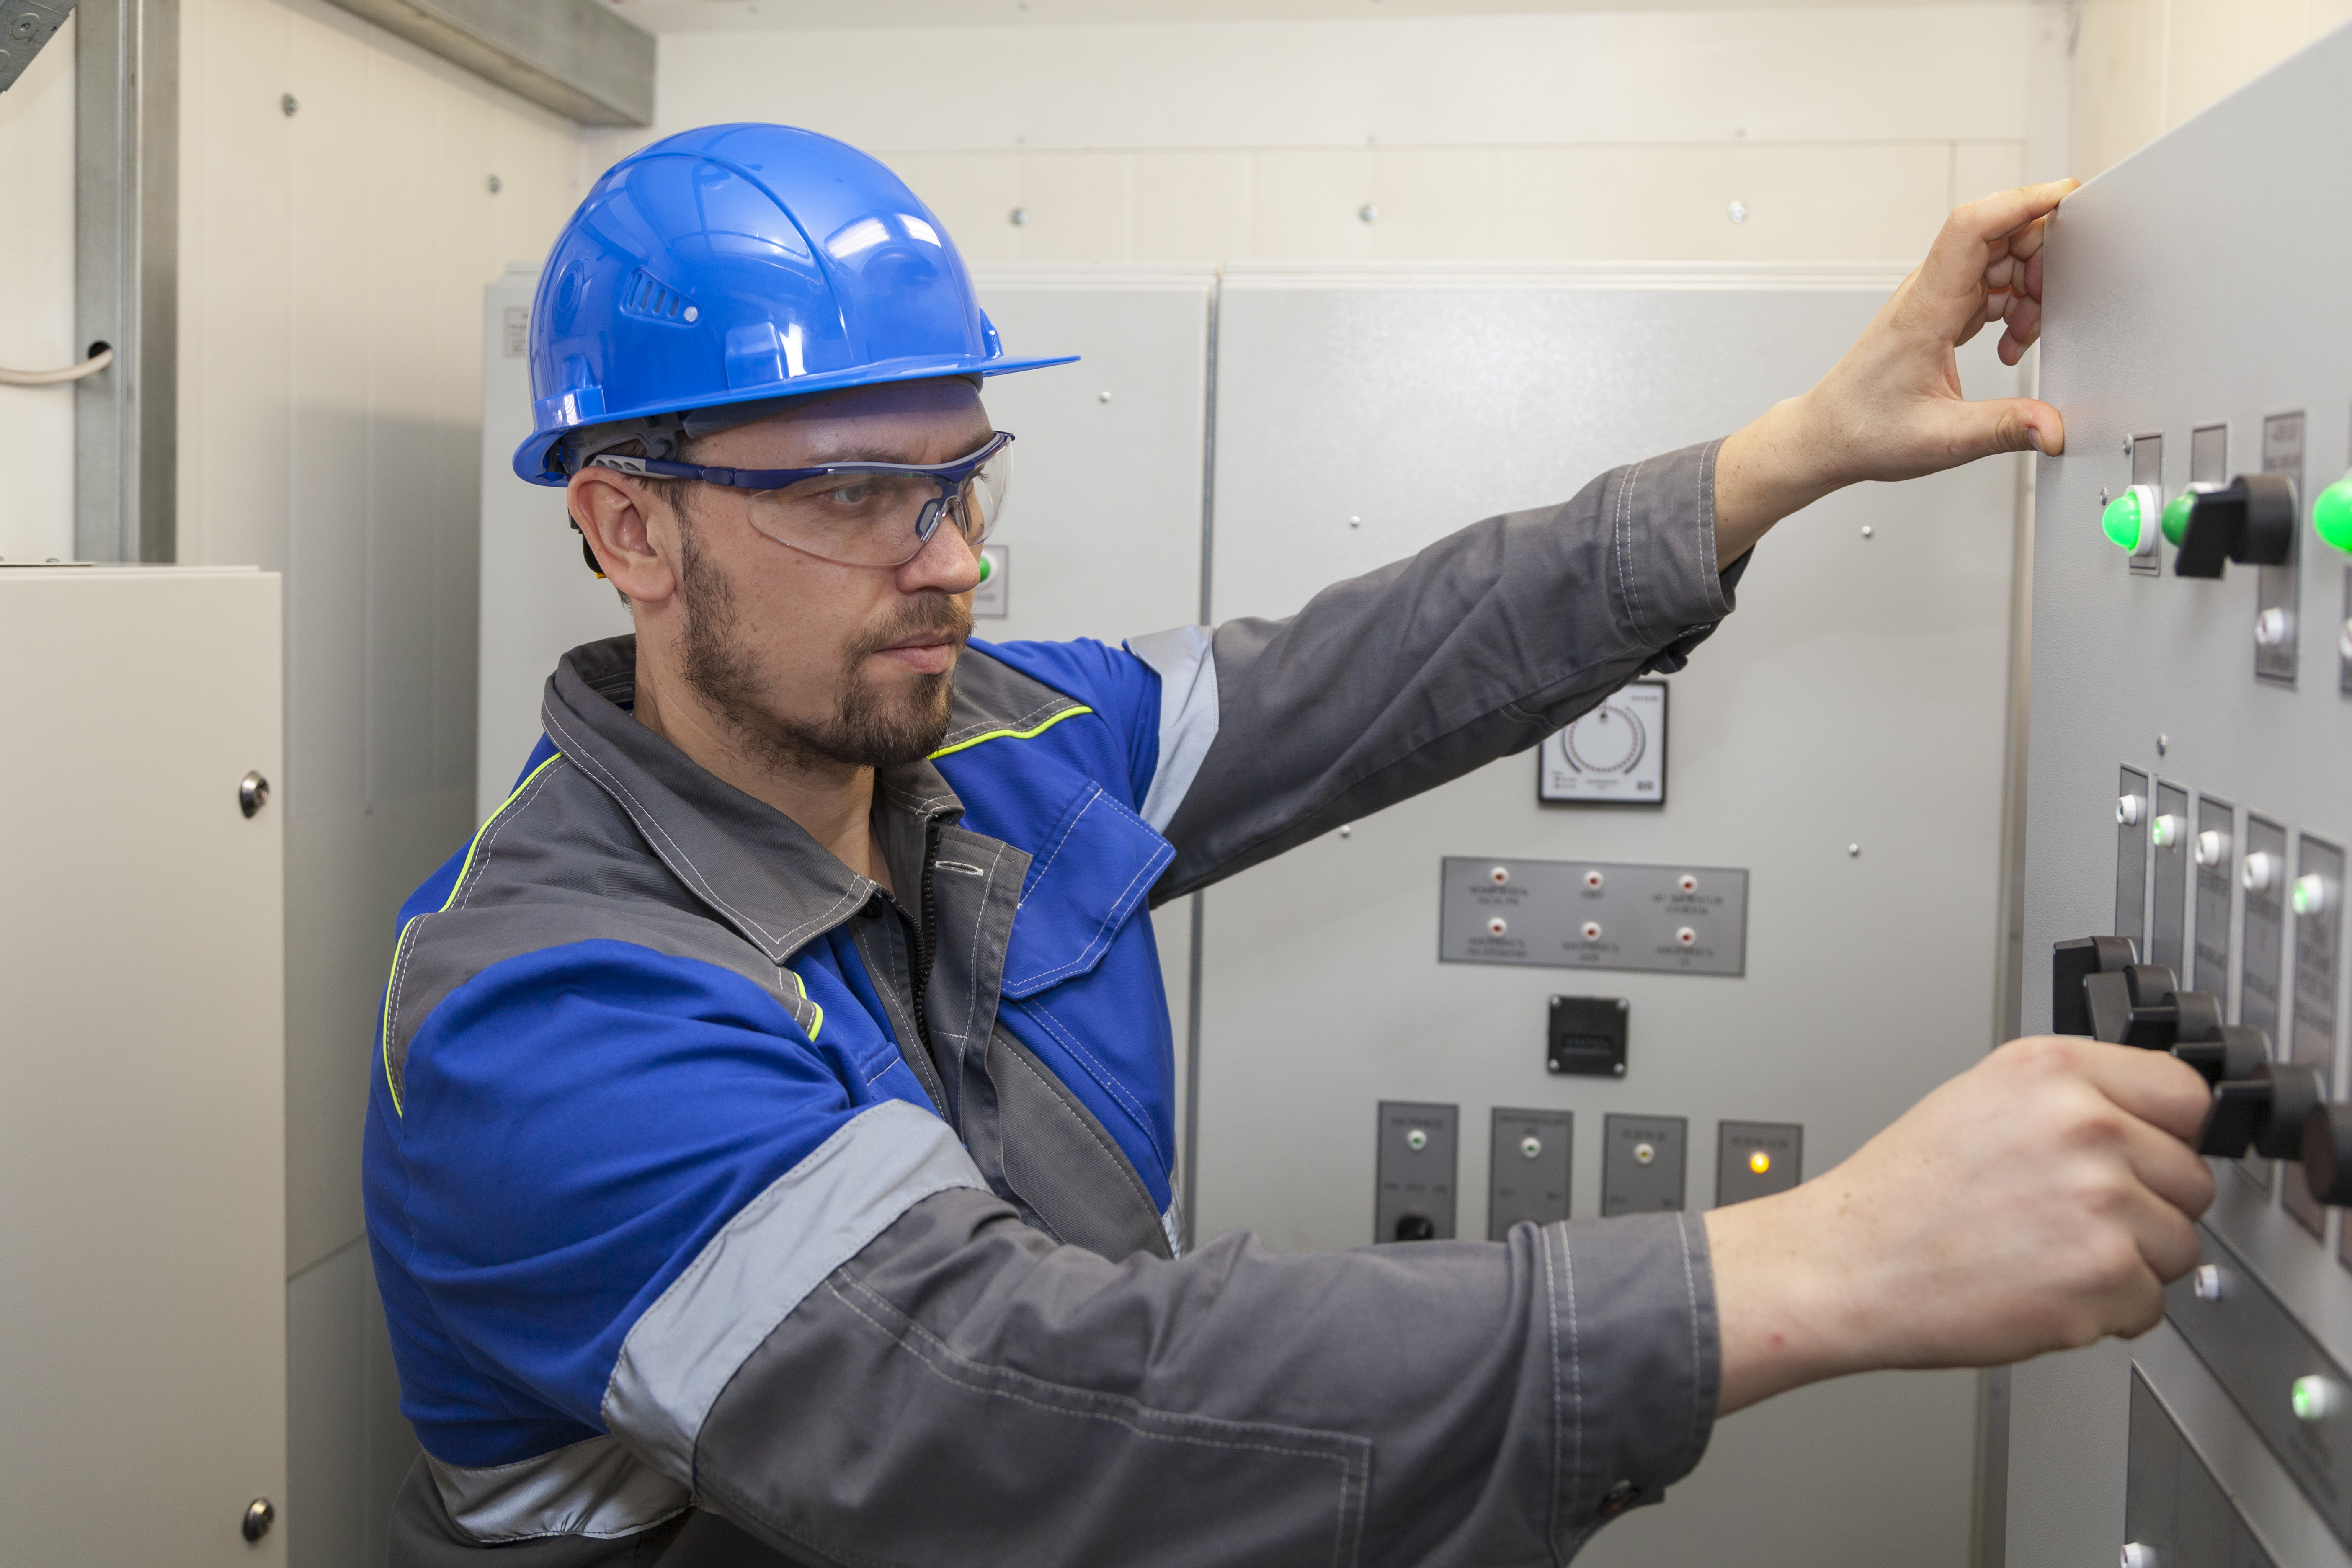 Energy and electricity, electromechanical protection when working with the electric panel, the electrician provides switching in the electrical switchboards in the electric panel